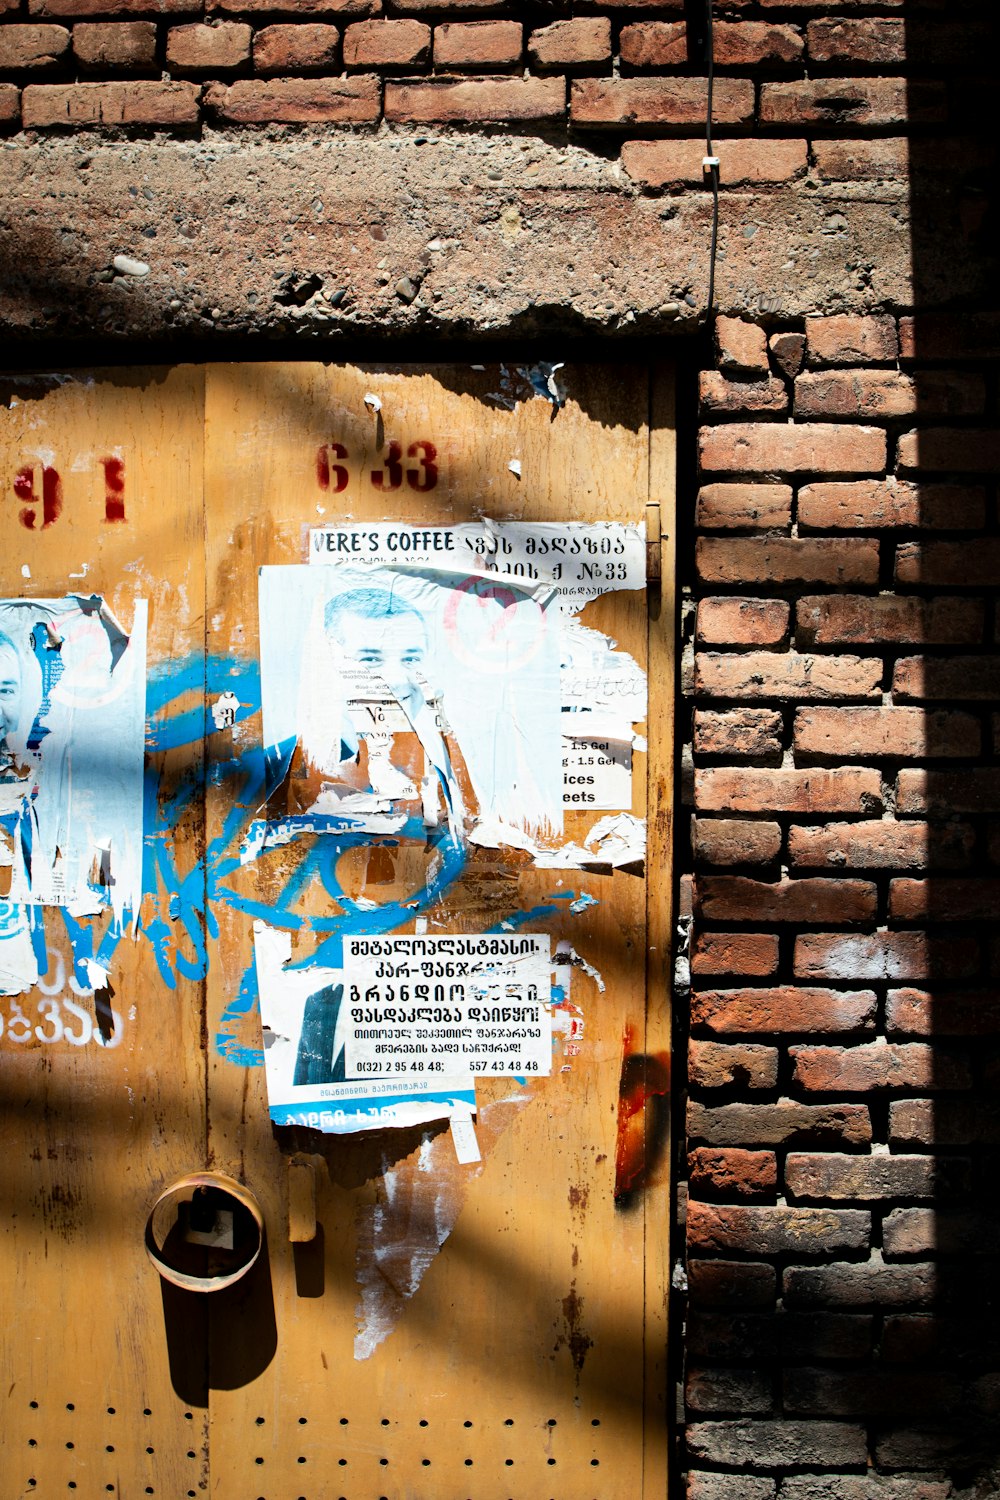 a wooden door with graffiti on it next to a brick wall